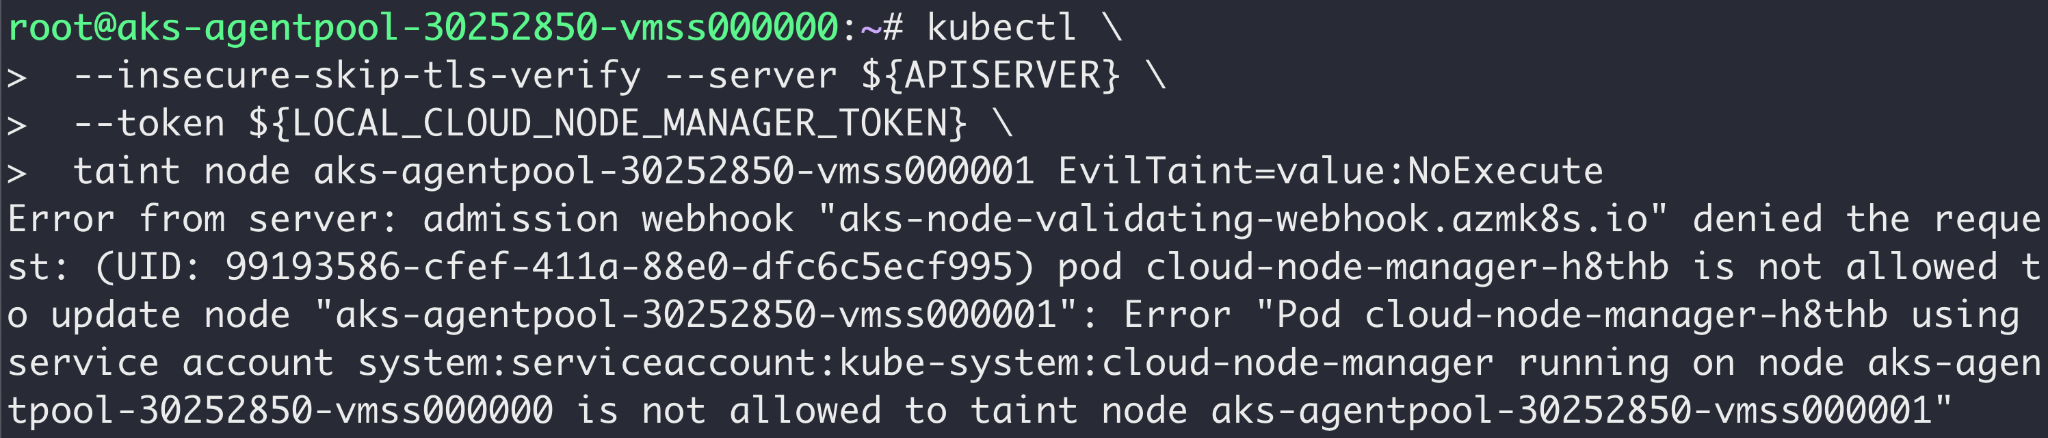 Image 5 is a screenshot of many lines of code demonstrating am attacker denied attempts to abuse a cloud-node-manager pod's credentials.